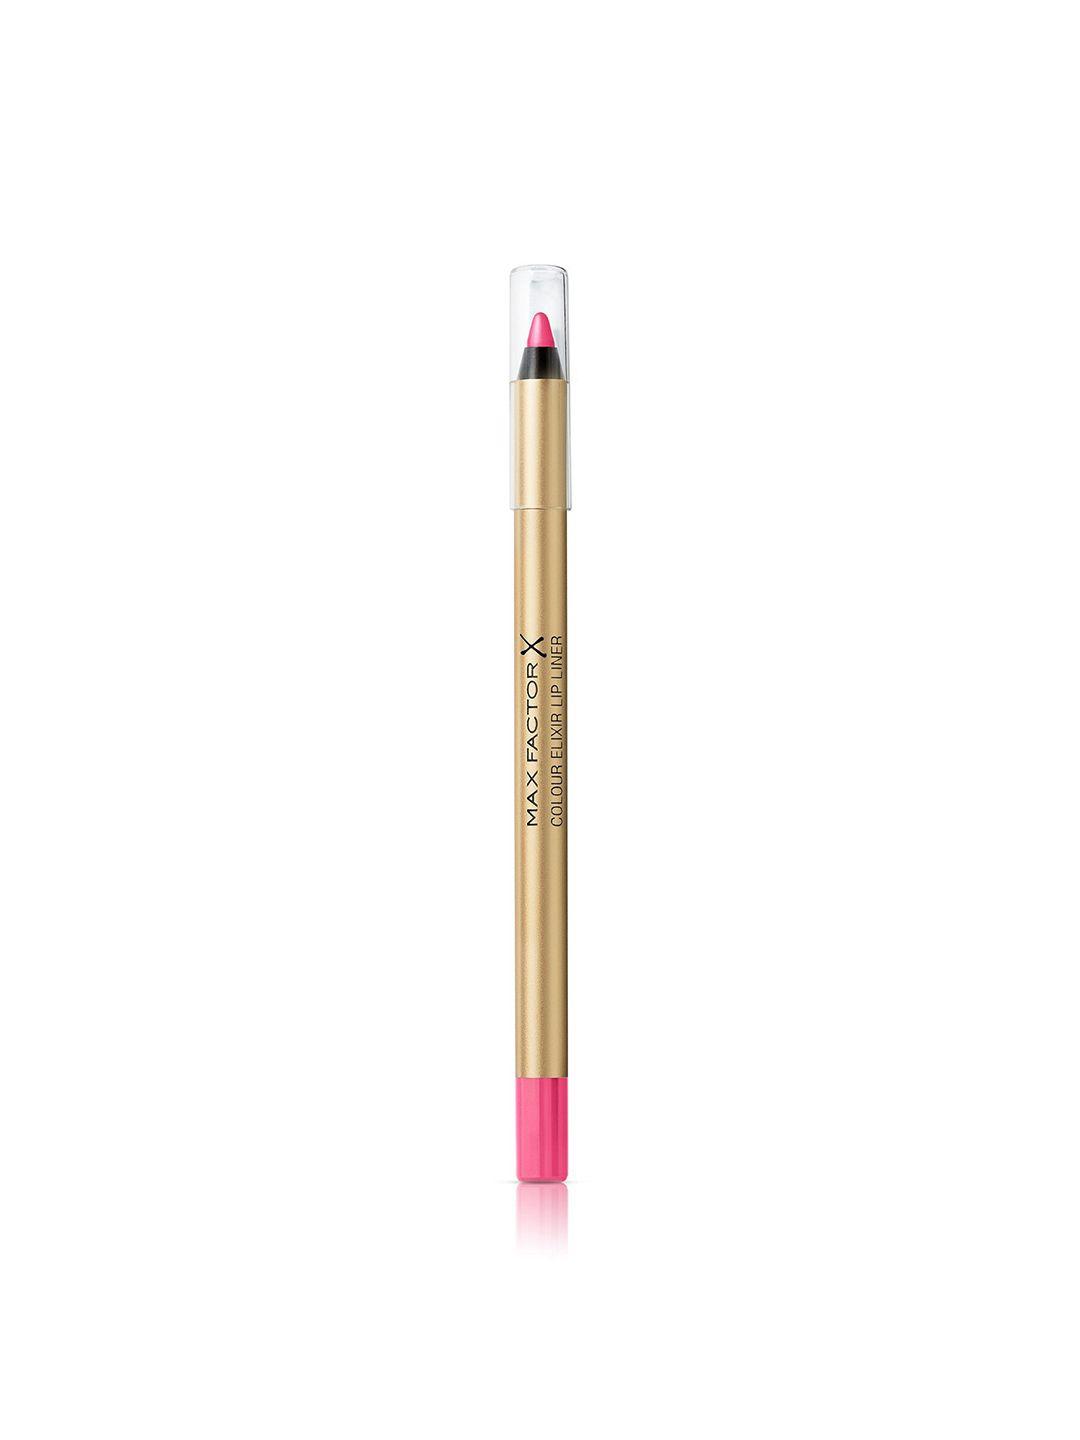 max factor highly pigmented colour elixir lip liner 1.2 g- pink princess